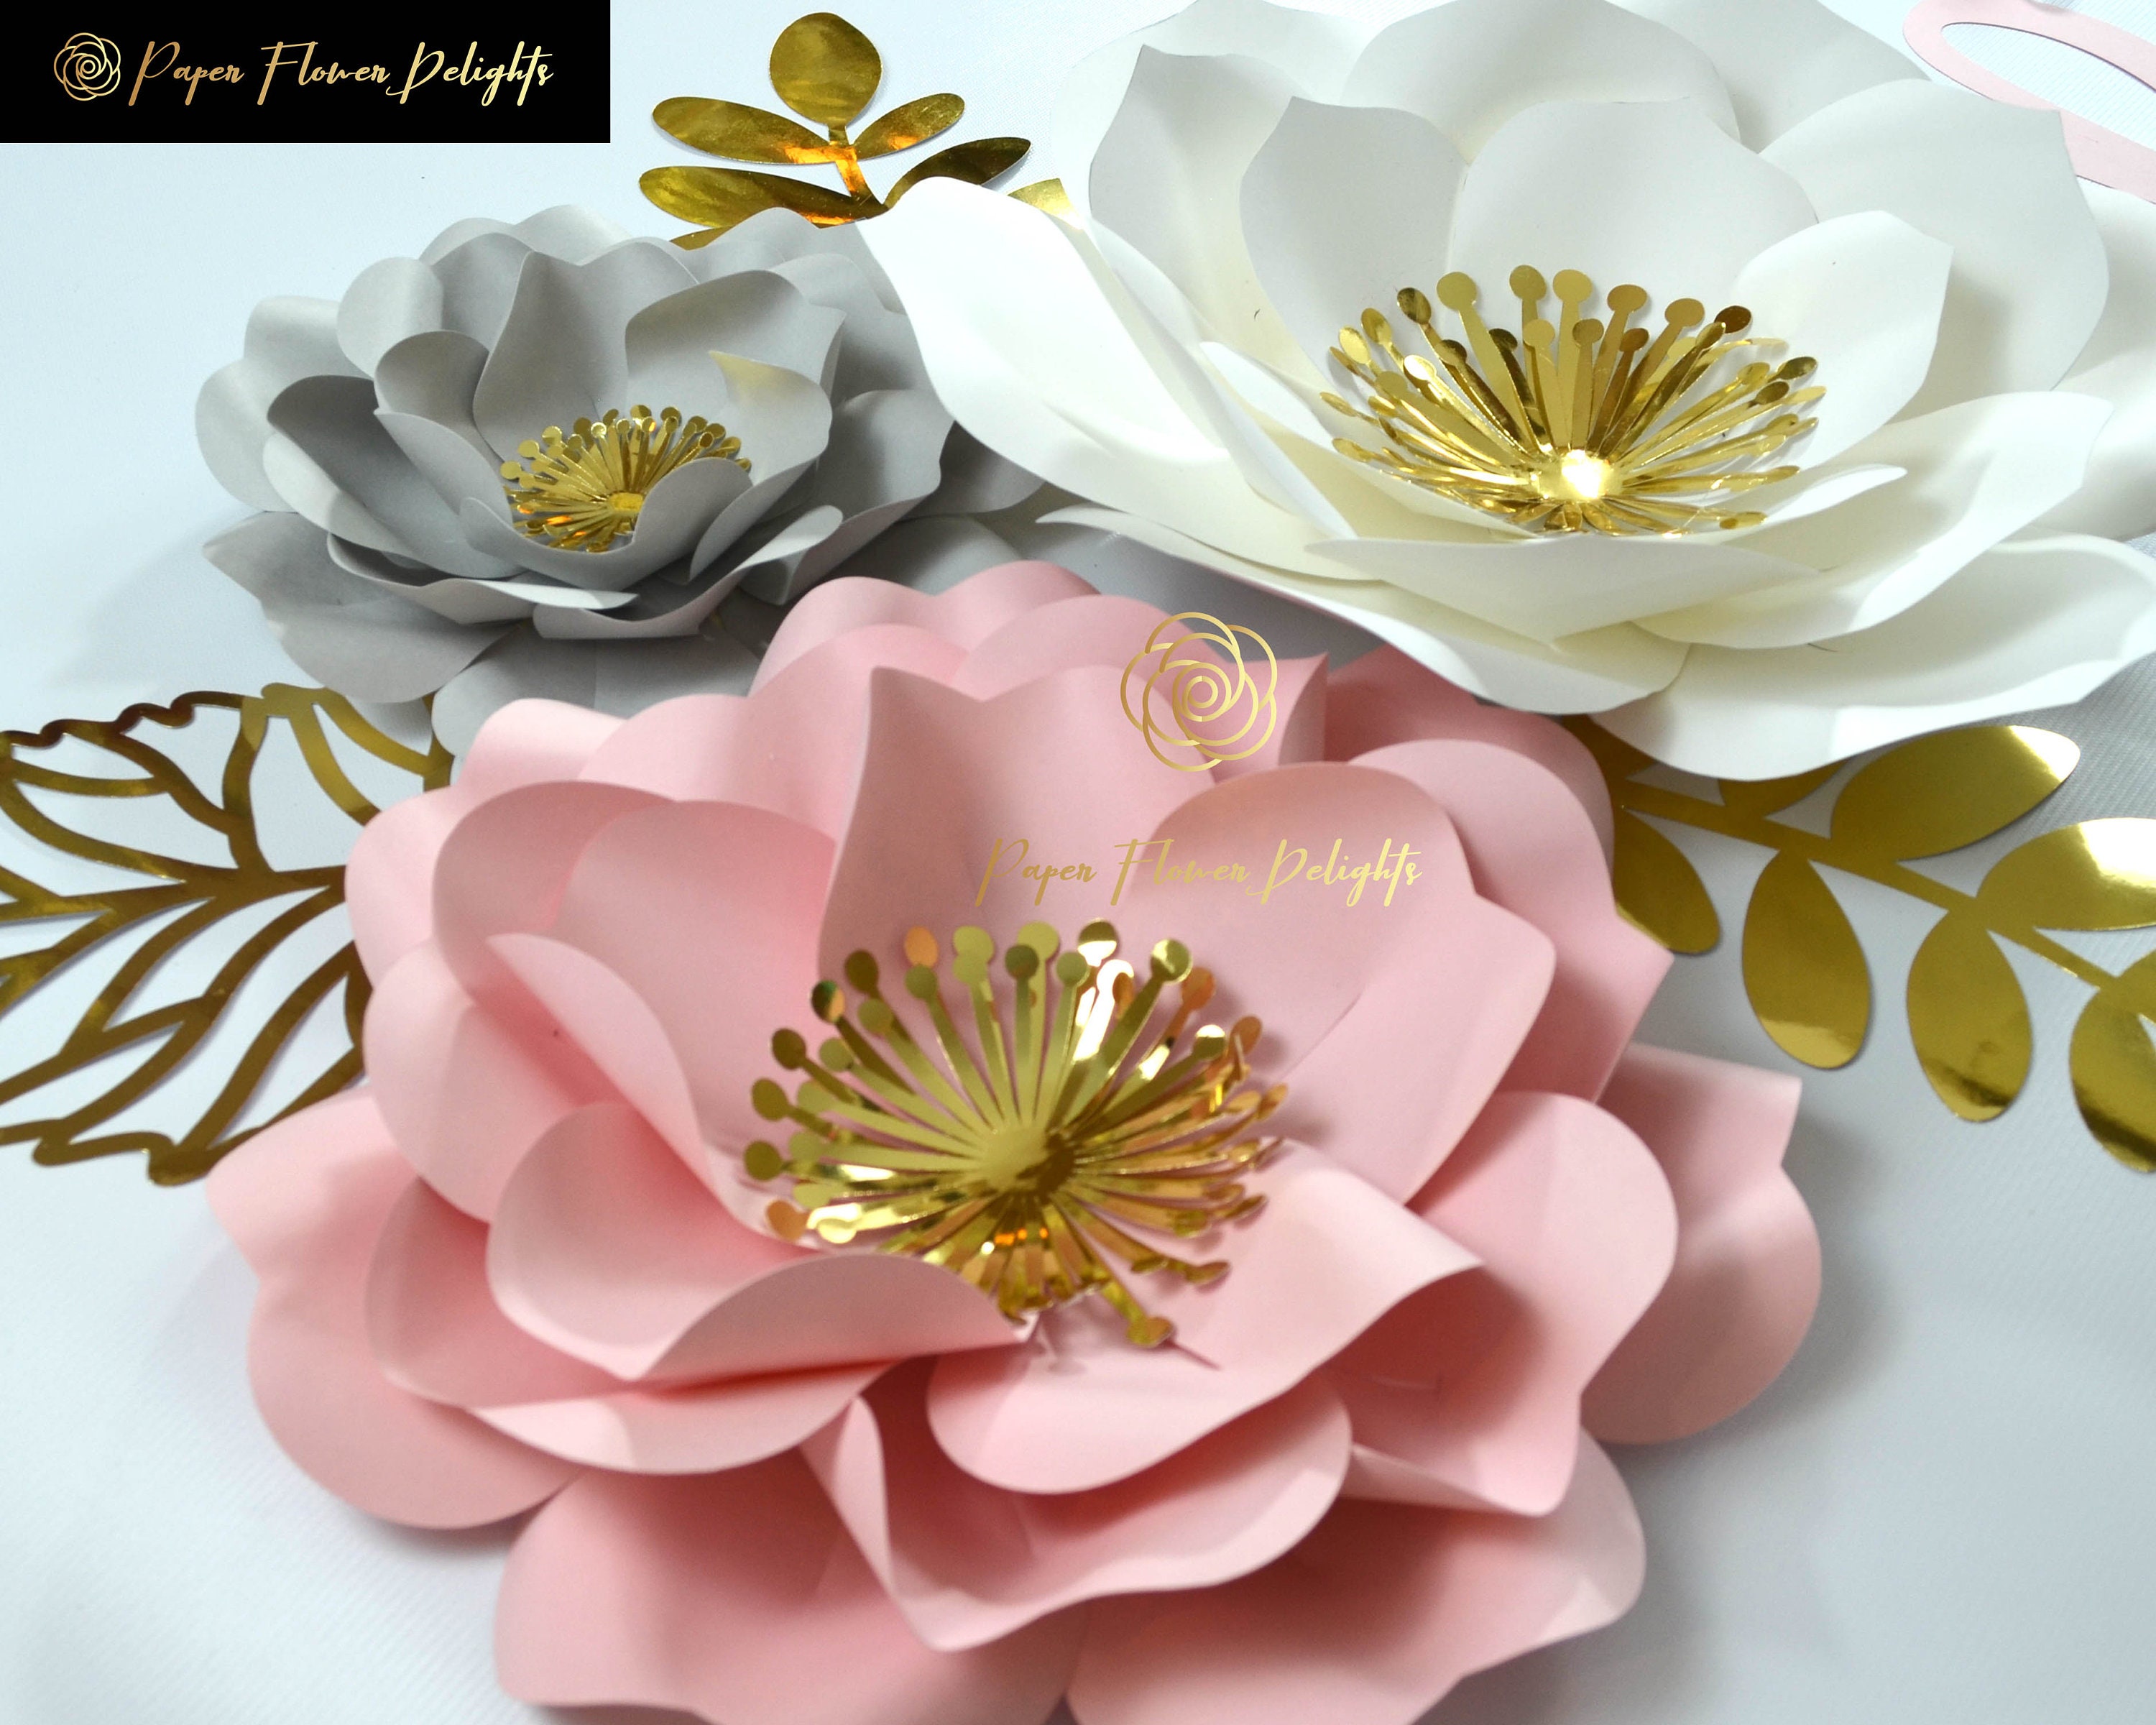 Rainbows & Lilies Large 3D Paper Flowers Decorations for Wall - 2-Set  Flower Wall Decor Bundle for Wedding, Bridal Shower, Baby Girl Nursery  Decor